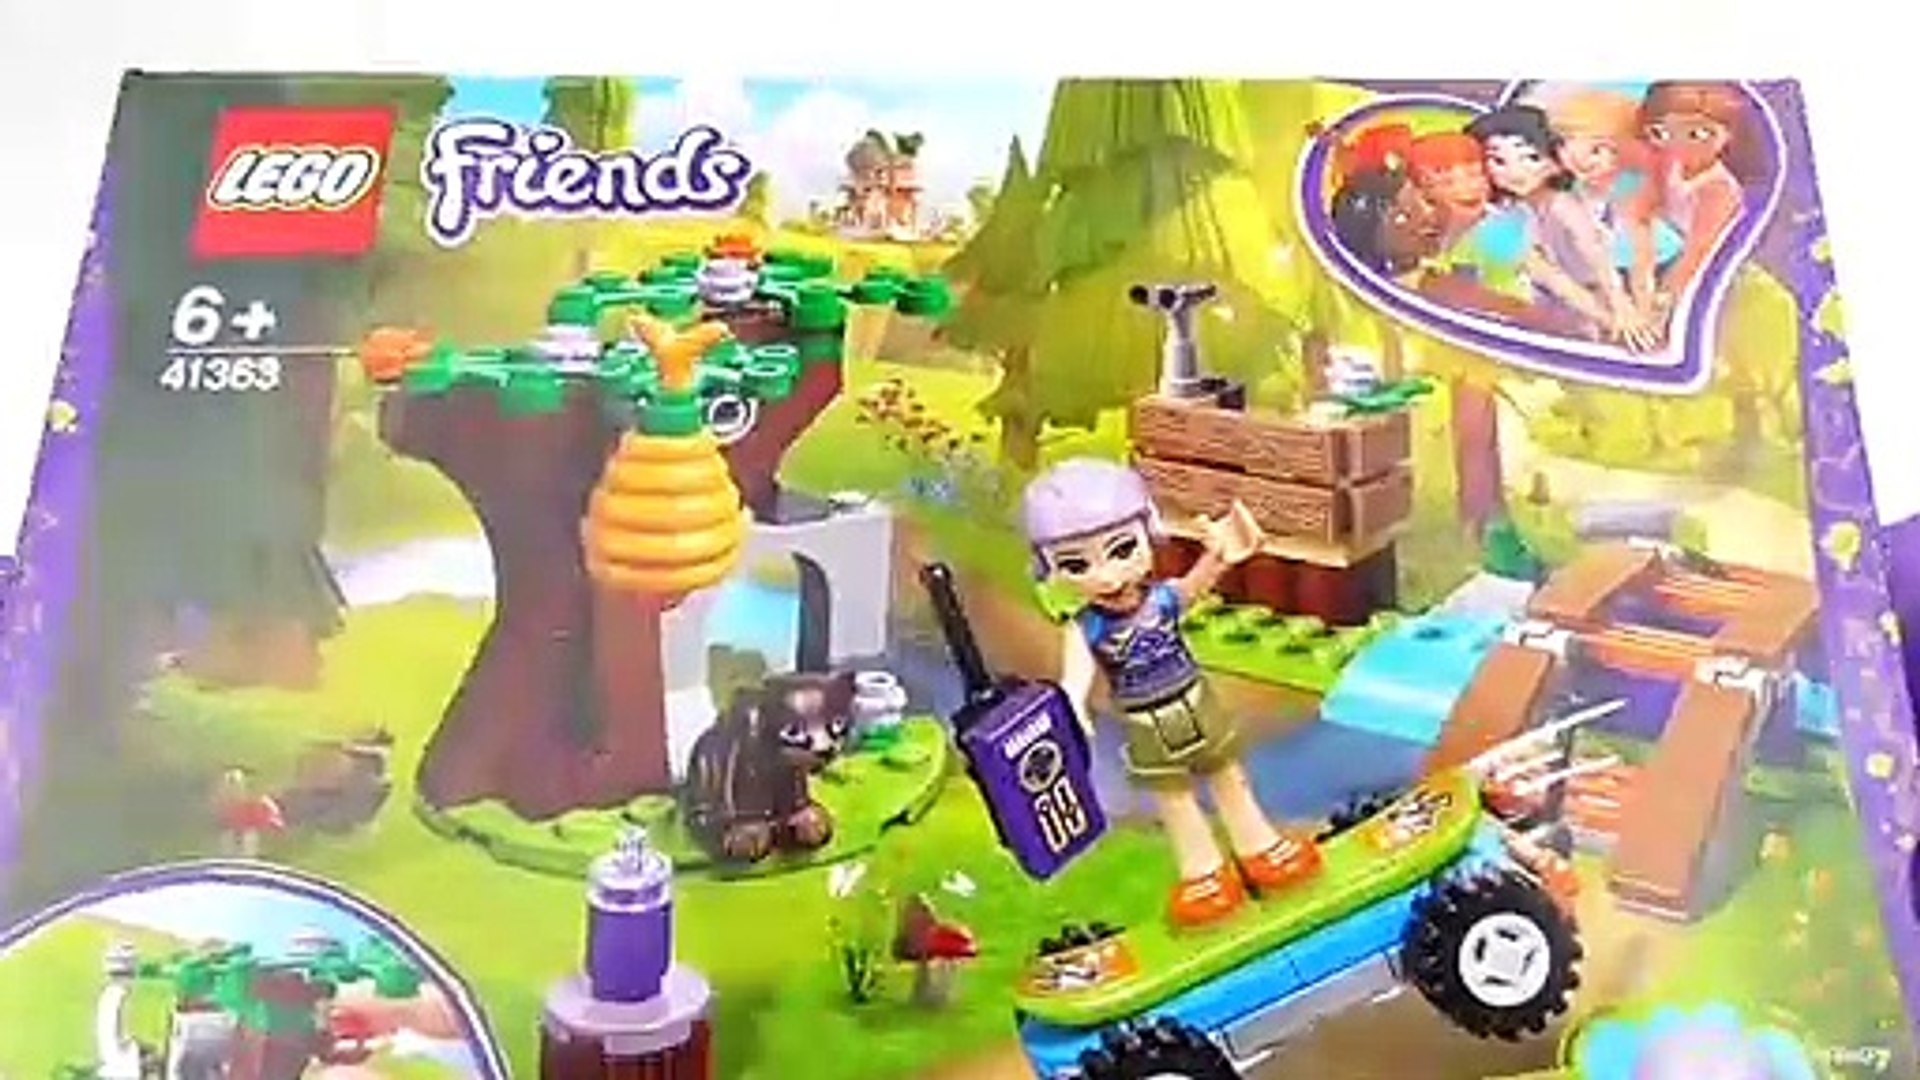 LEGO Friends Mia's Forest Adventure (41363) - Toy Unboxing and Speed Build  - video Dailymotion